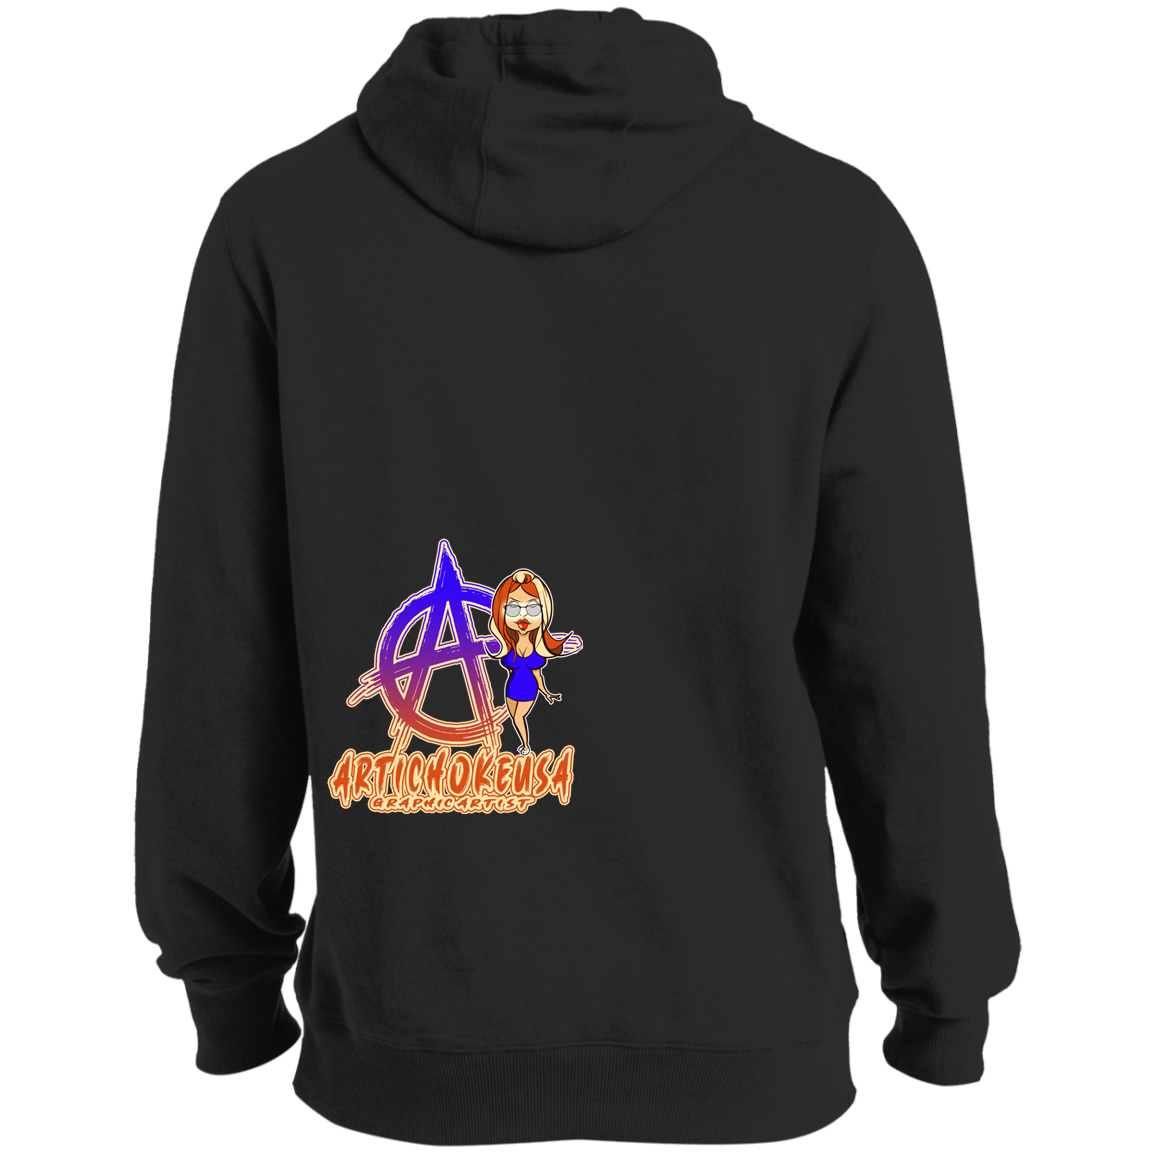 ArtichokeUSA Character and Font Design. Let’s Create Your Own Design Today. Blue Girl. Tall Pullover Hoodie